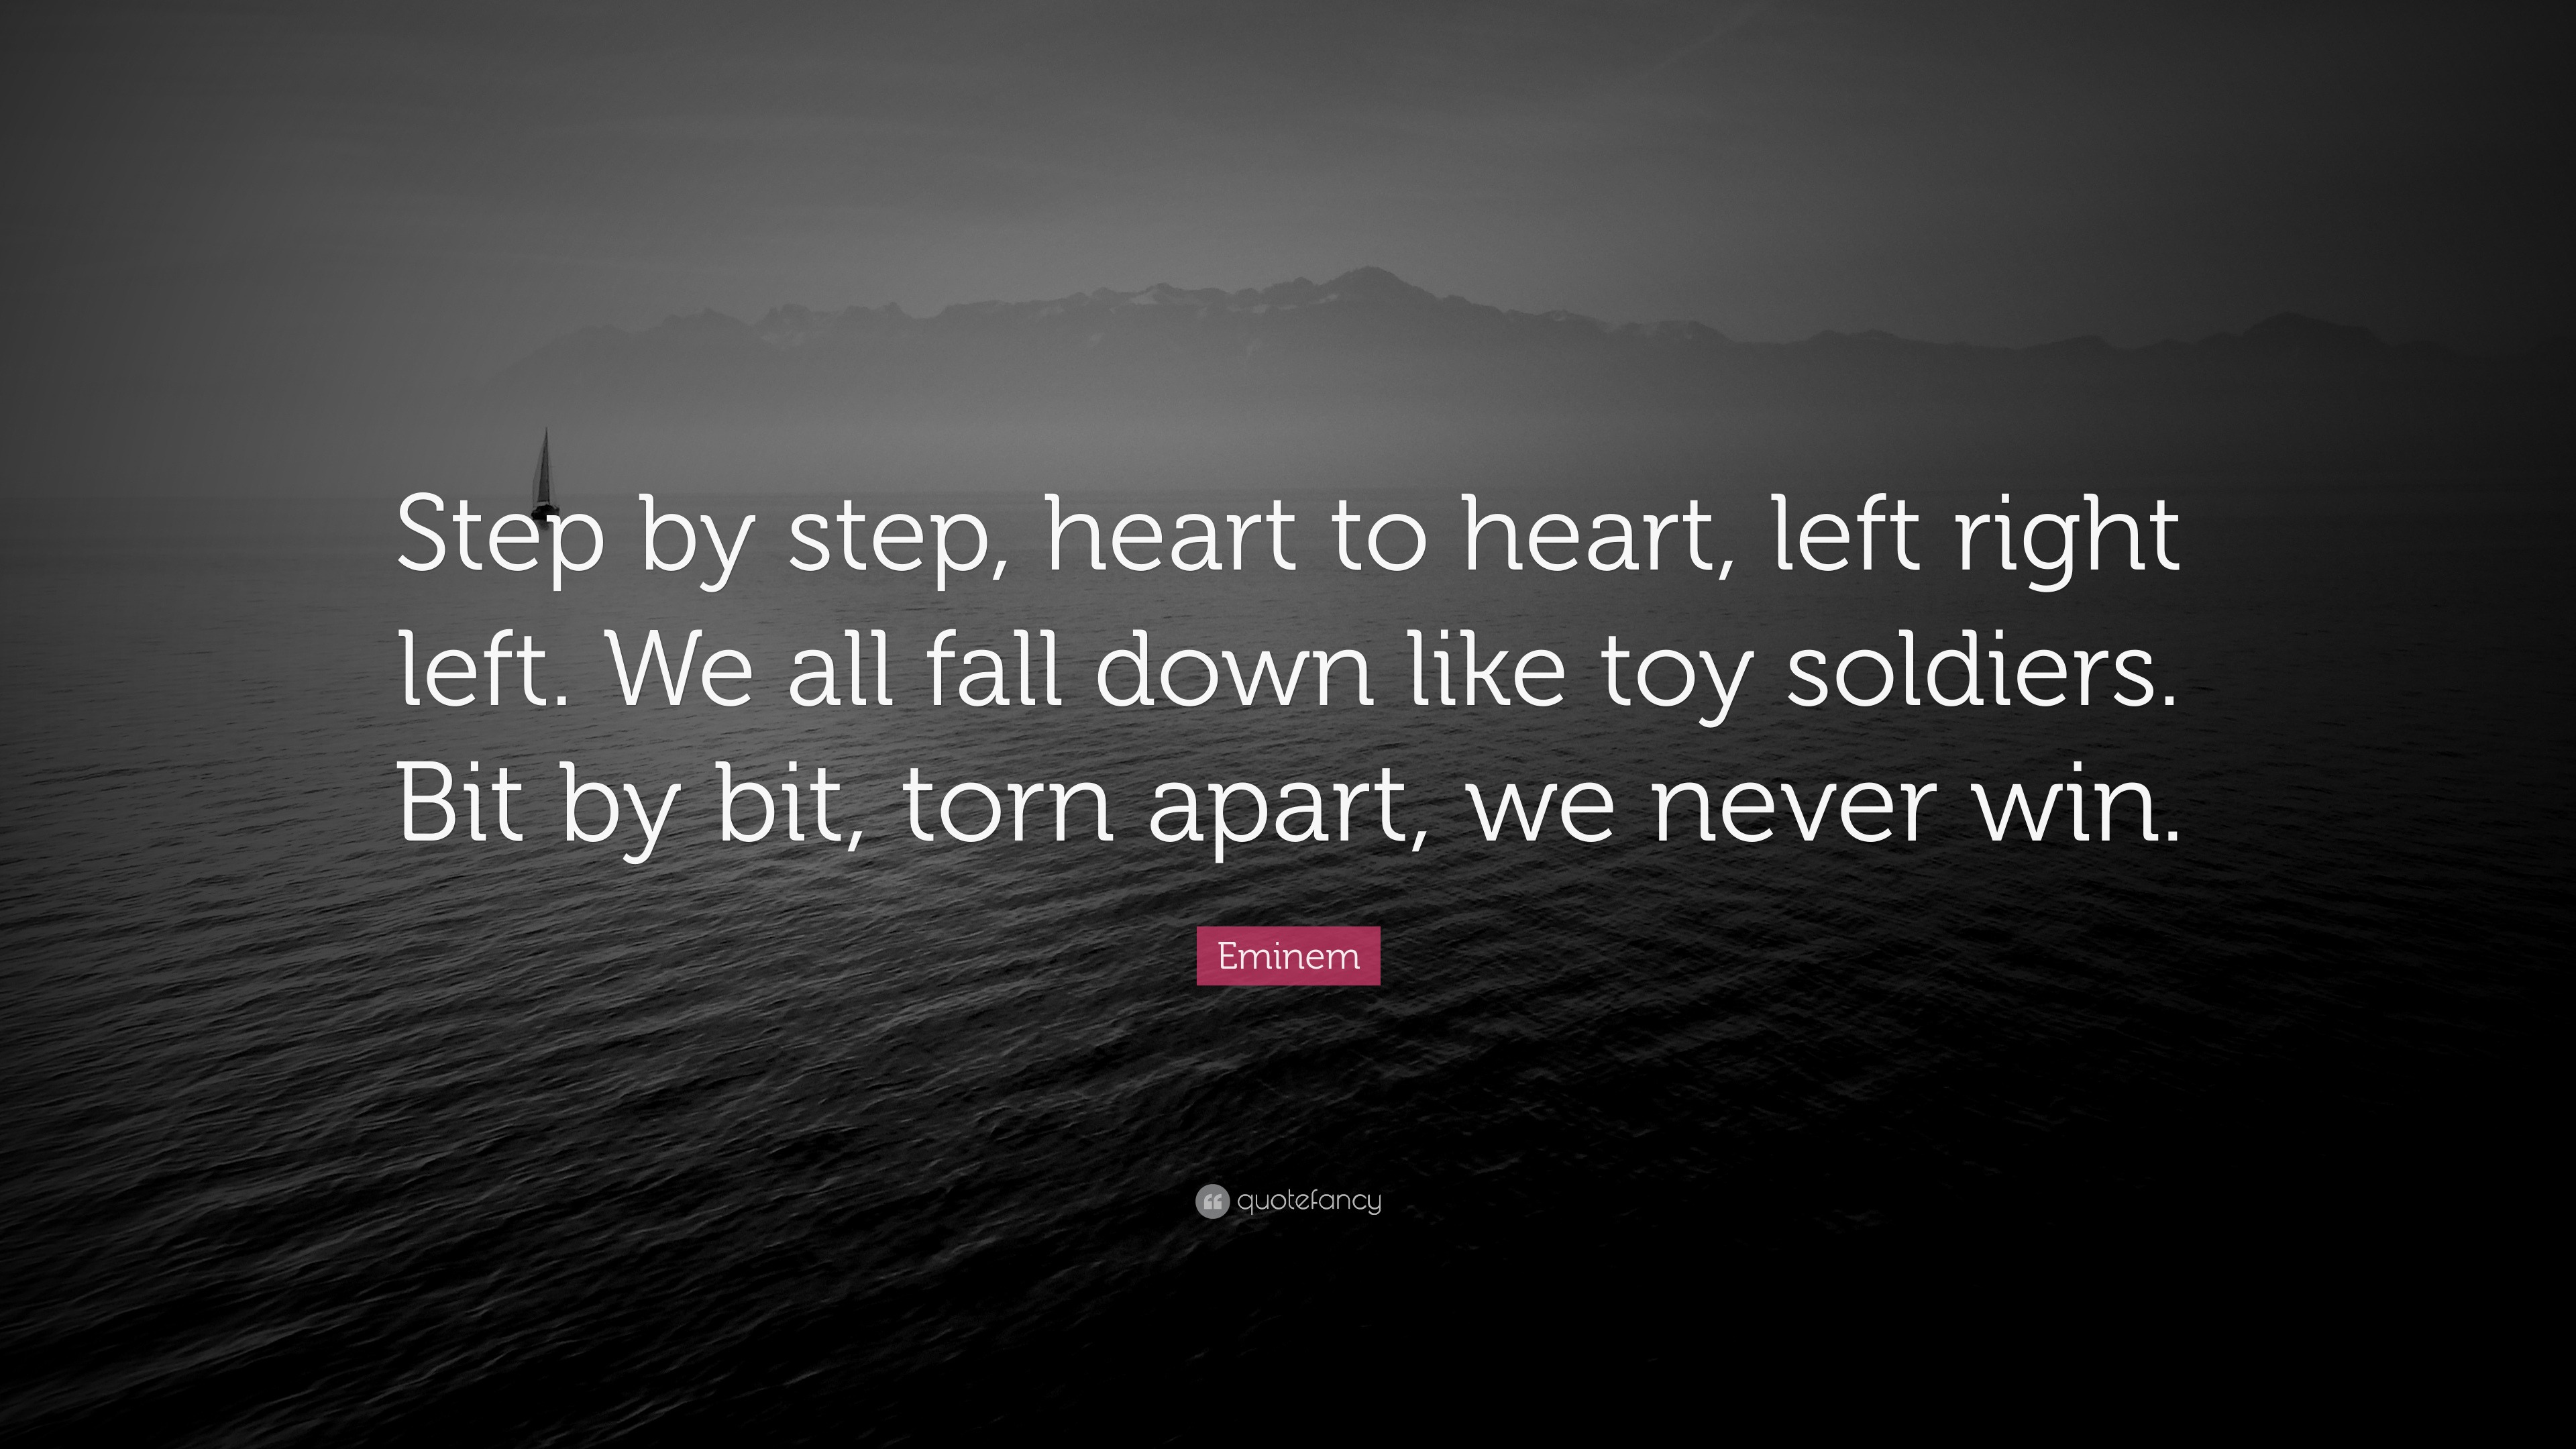 Quote: “Step by heart to heart, left right left. We all fall like